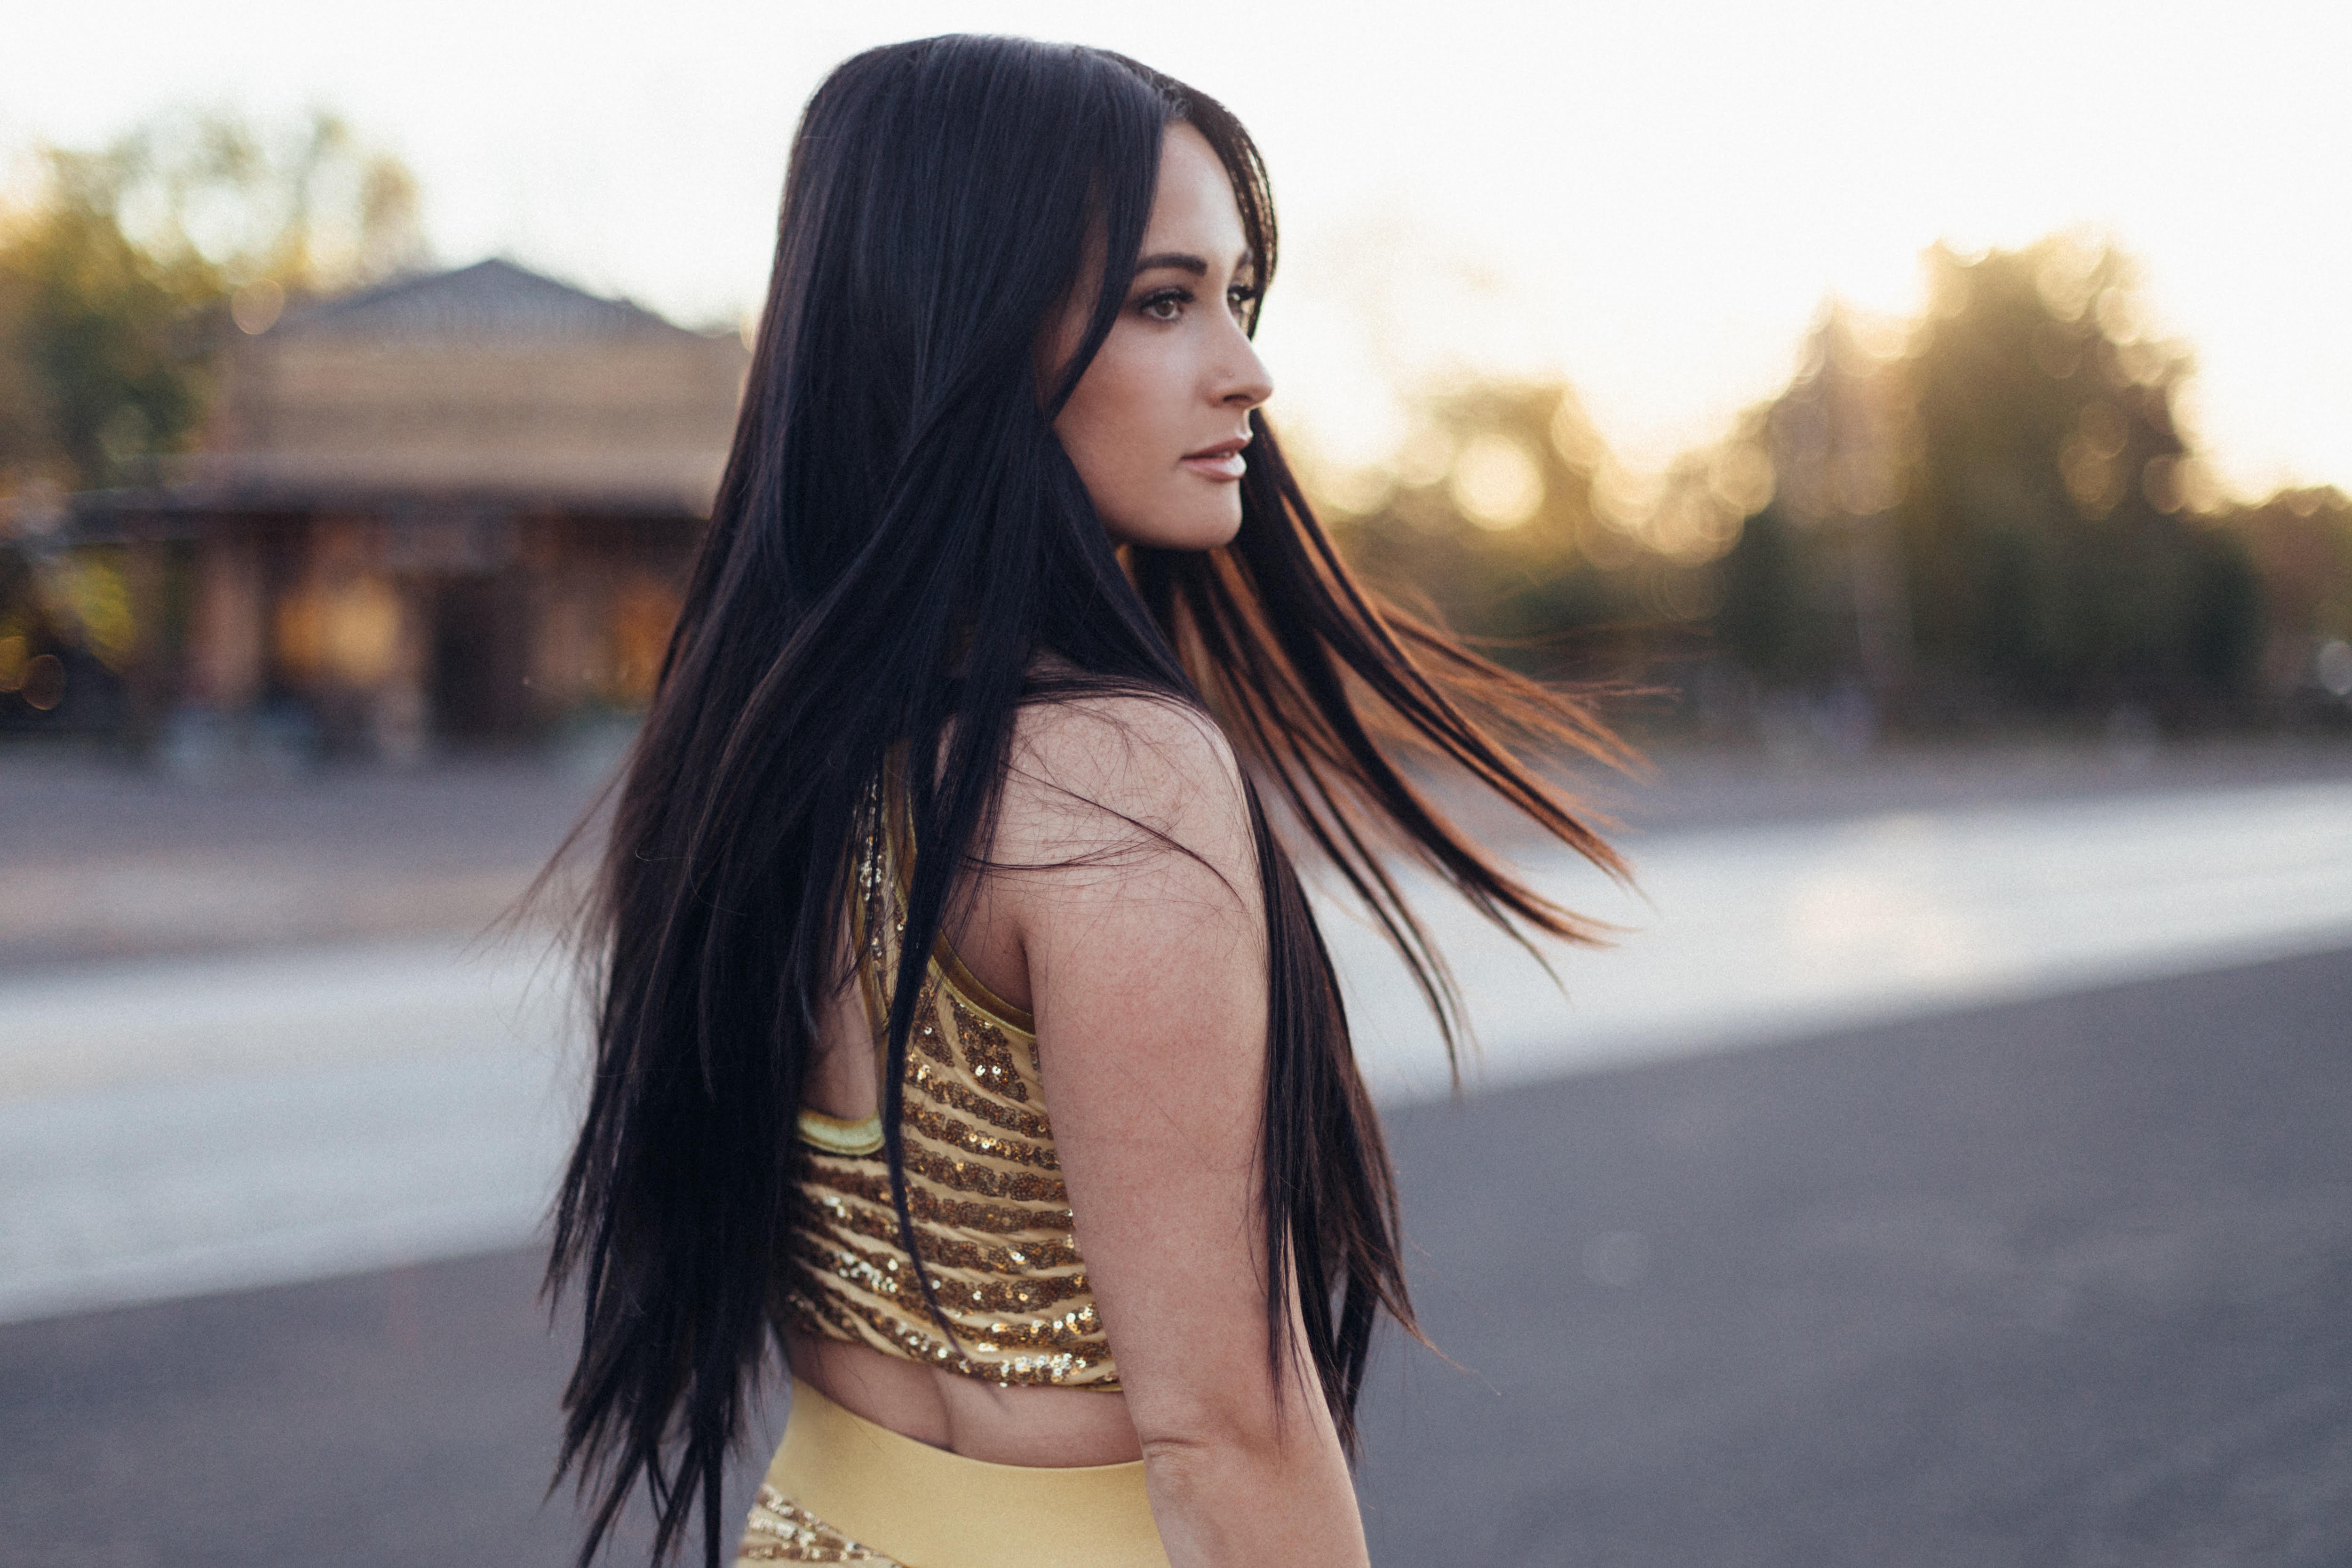 Concerts In Phoenix February 11 14: Kacey Musgraves, Pedro The Lion